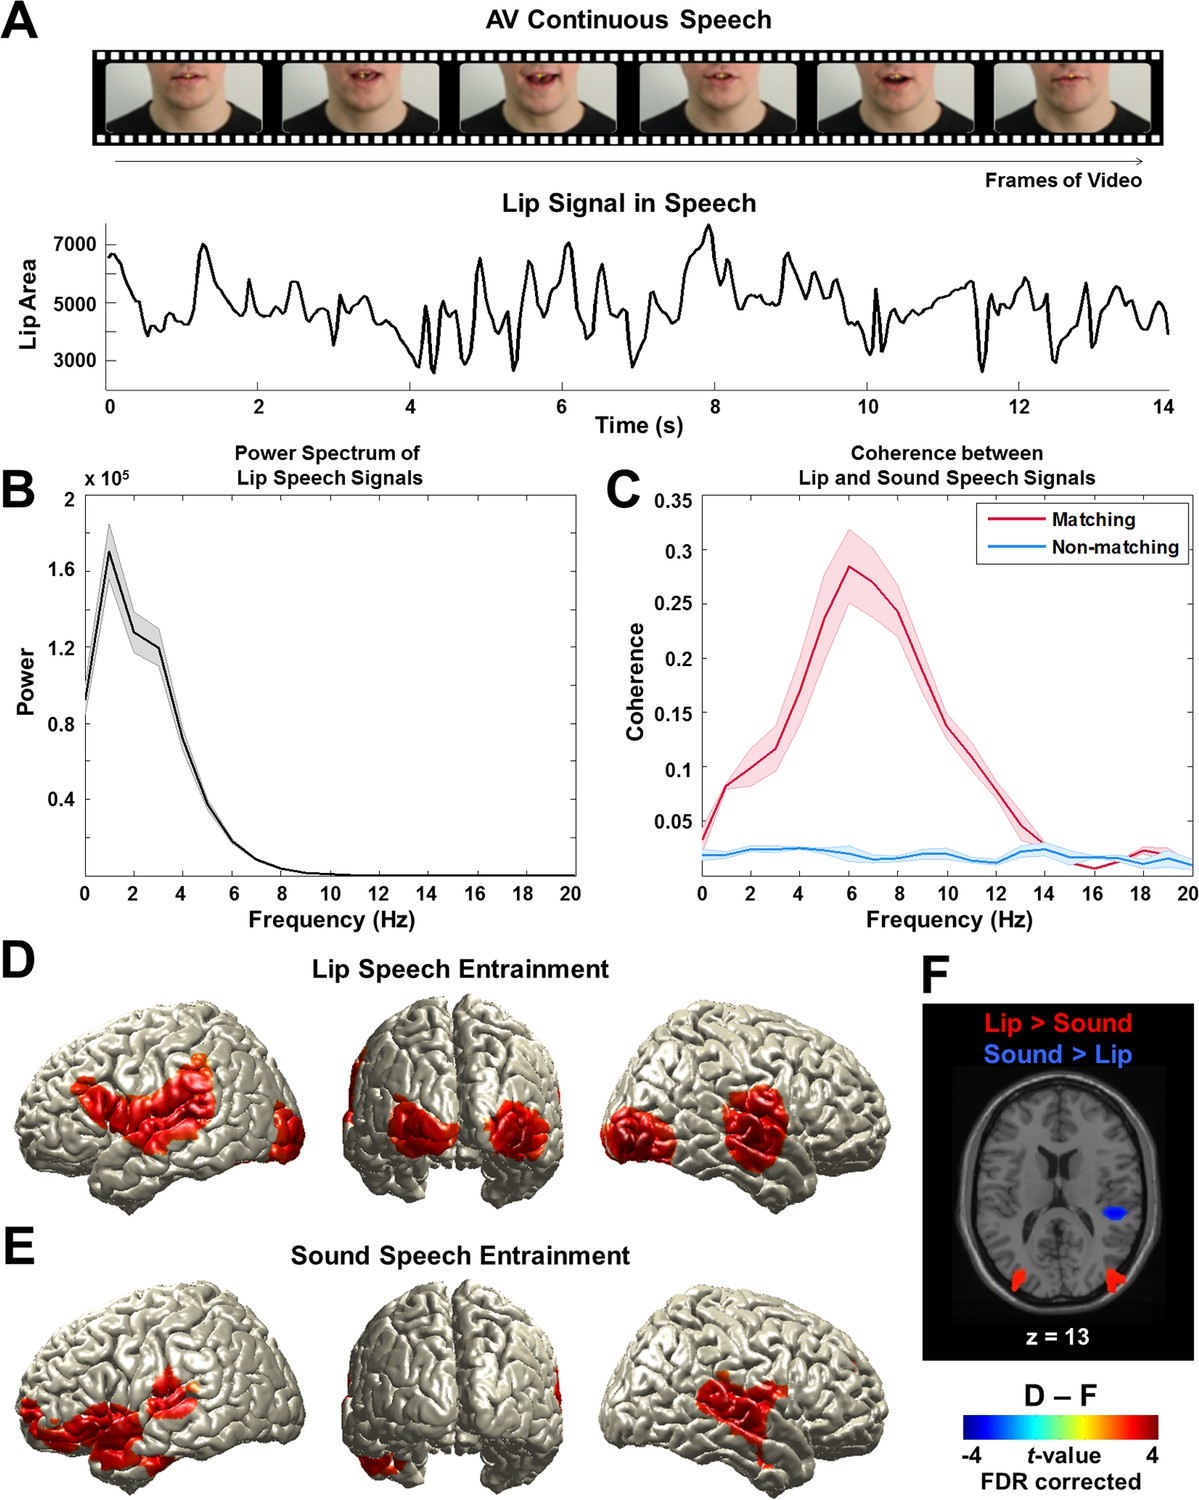 Lip movements entrain the observers’ low-frequency brain oscillations to facilitate speech intelligibility